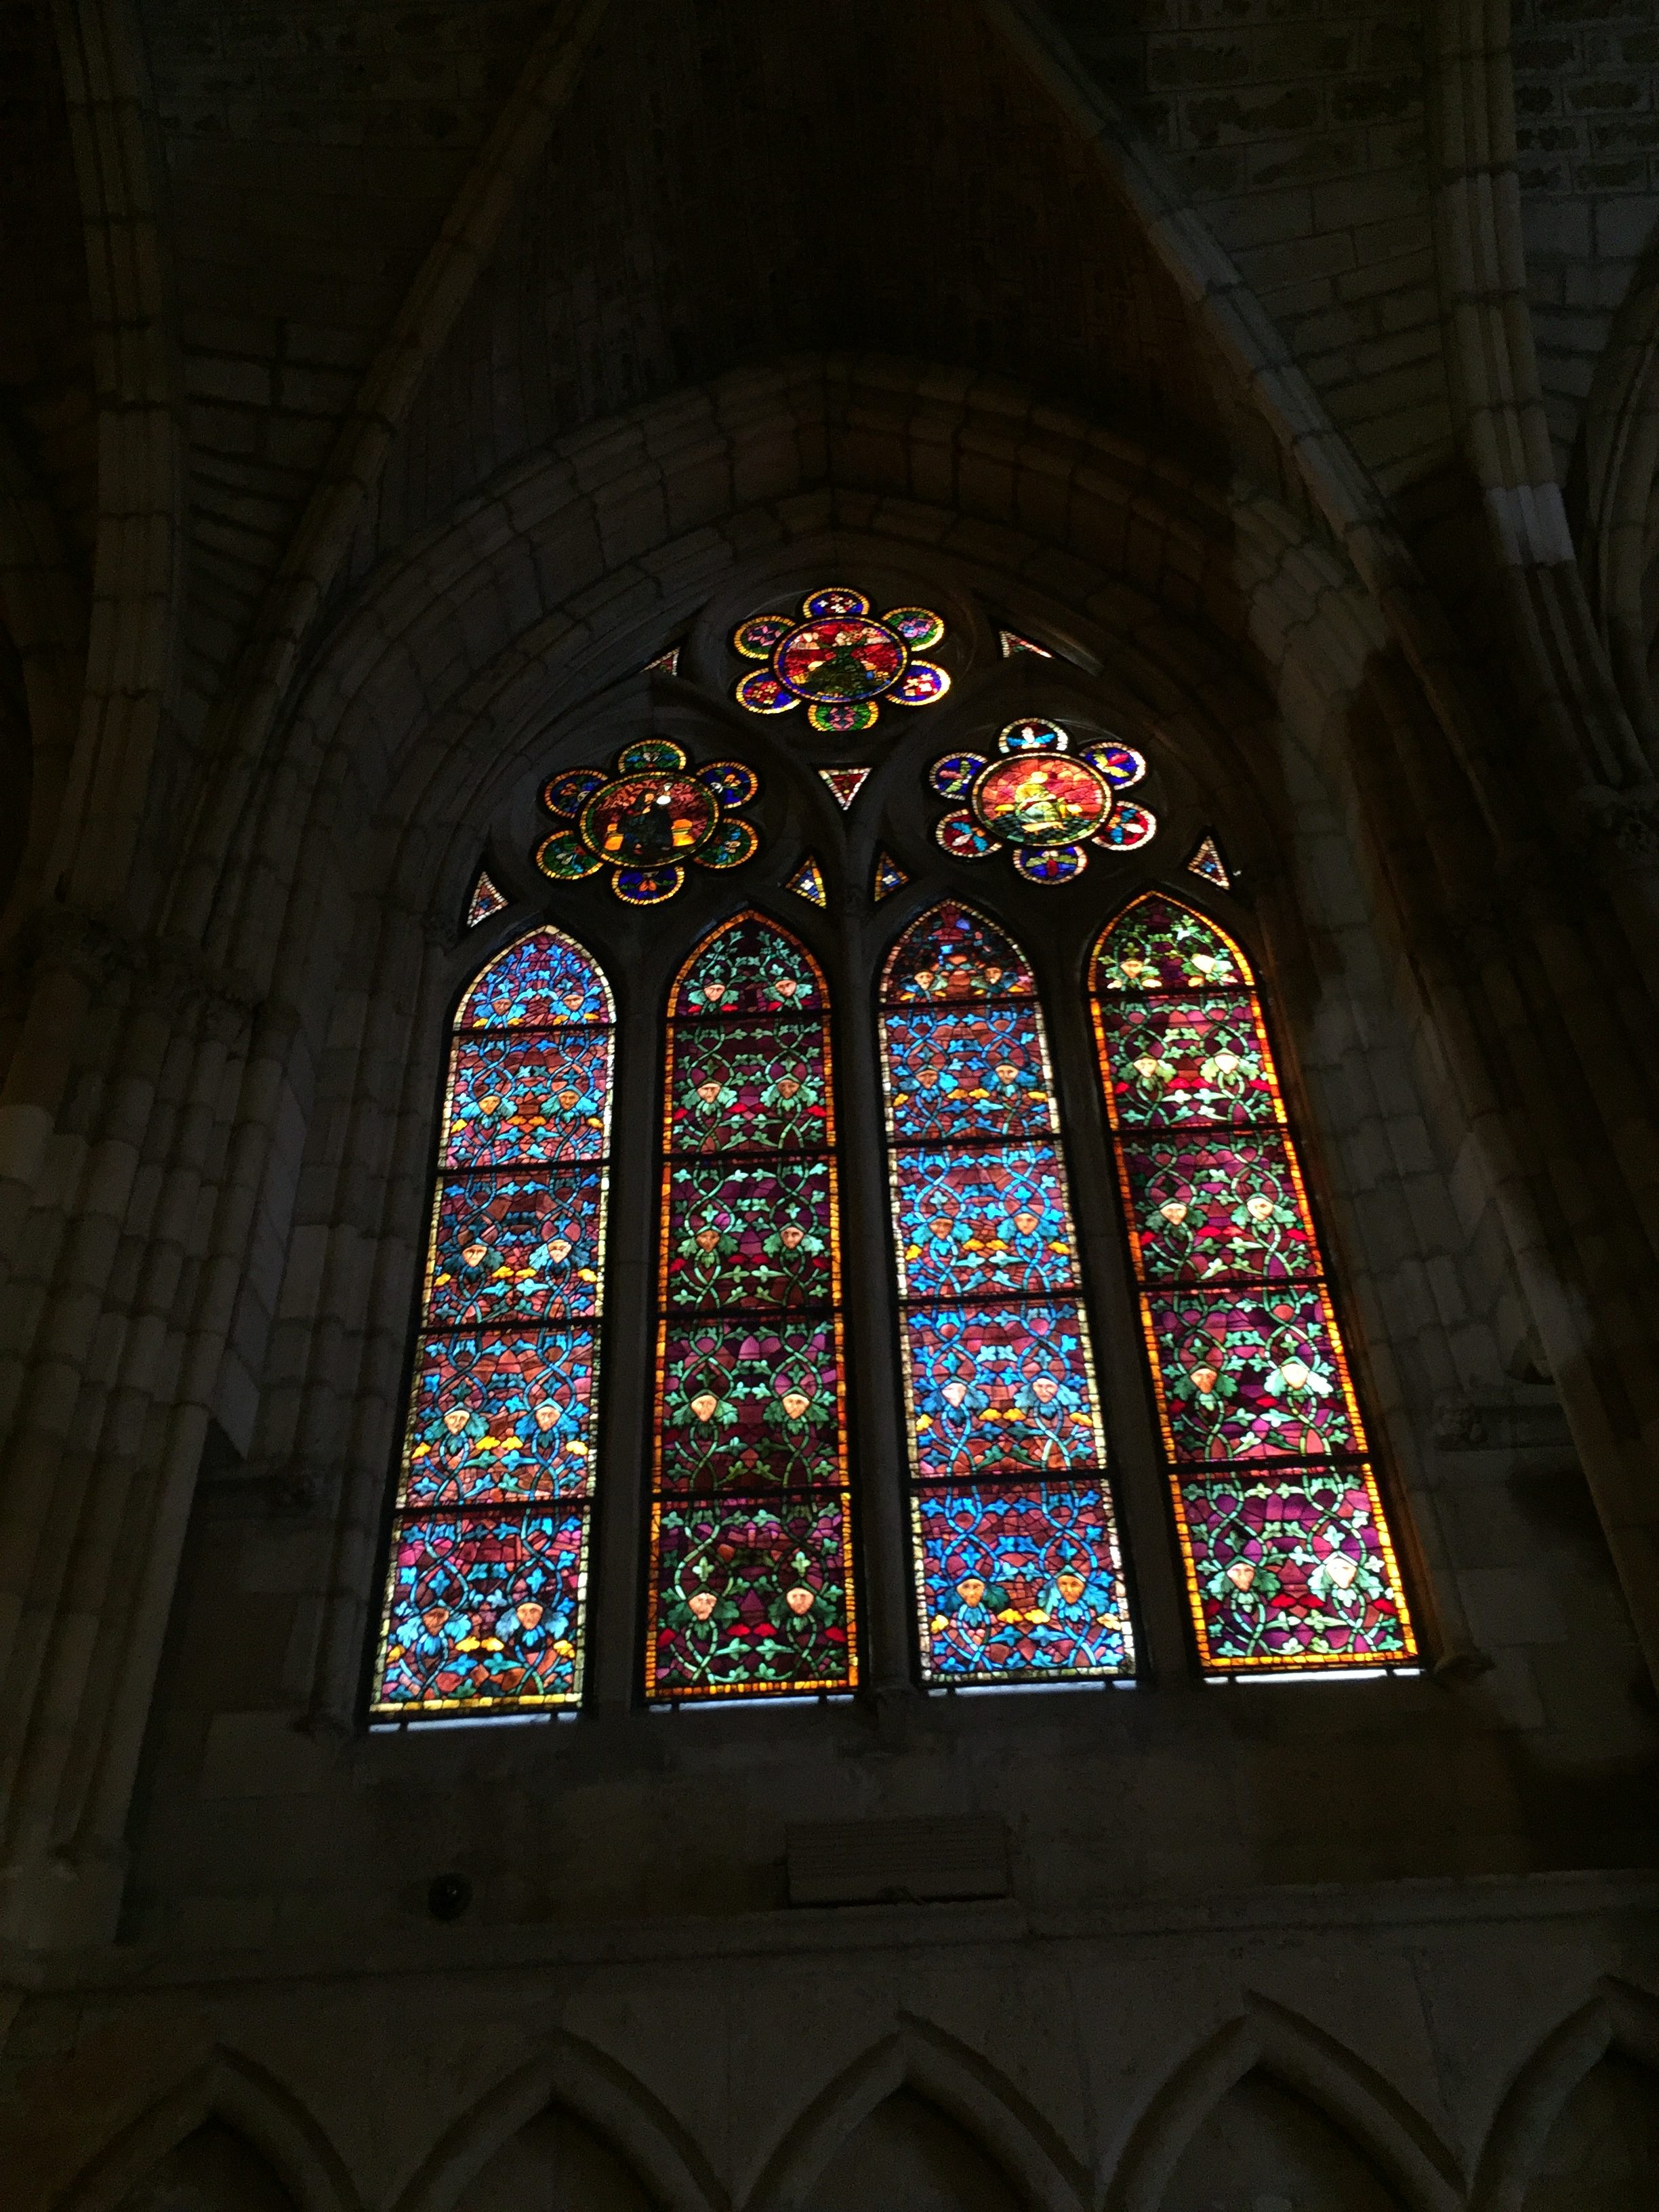 Stained glass windows inside cathedral